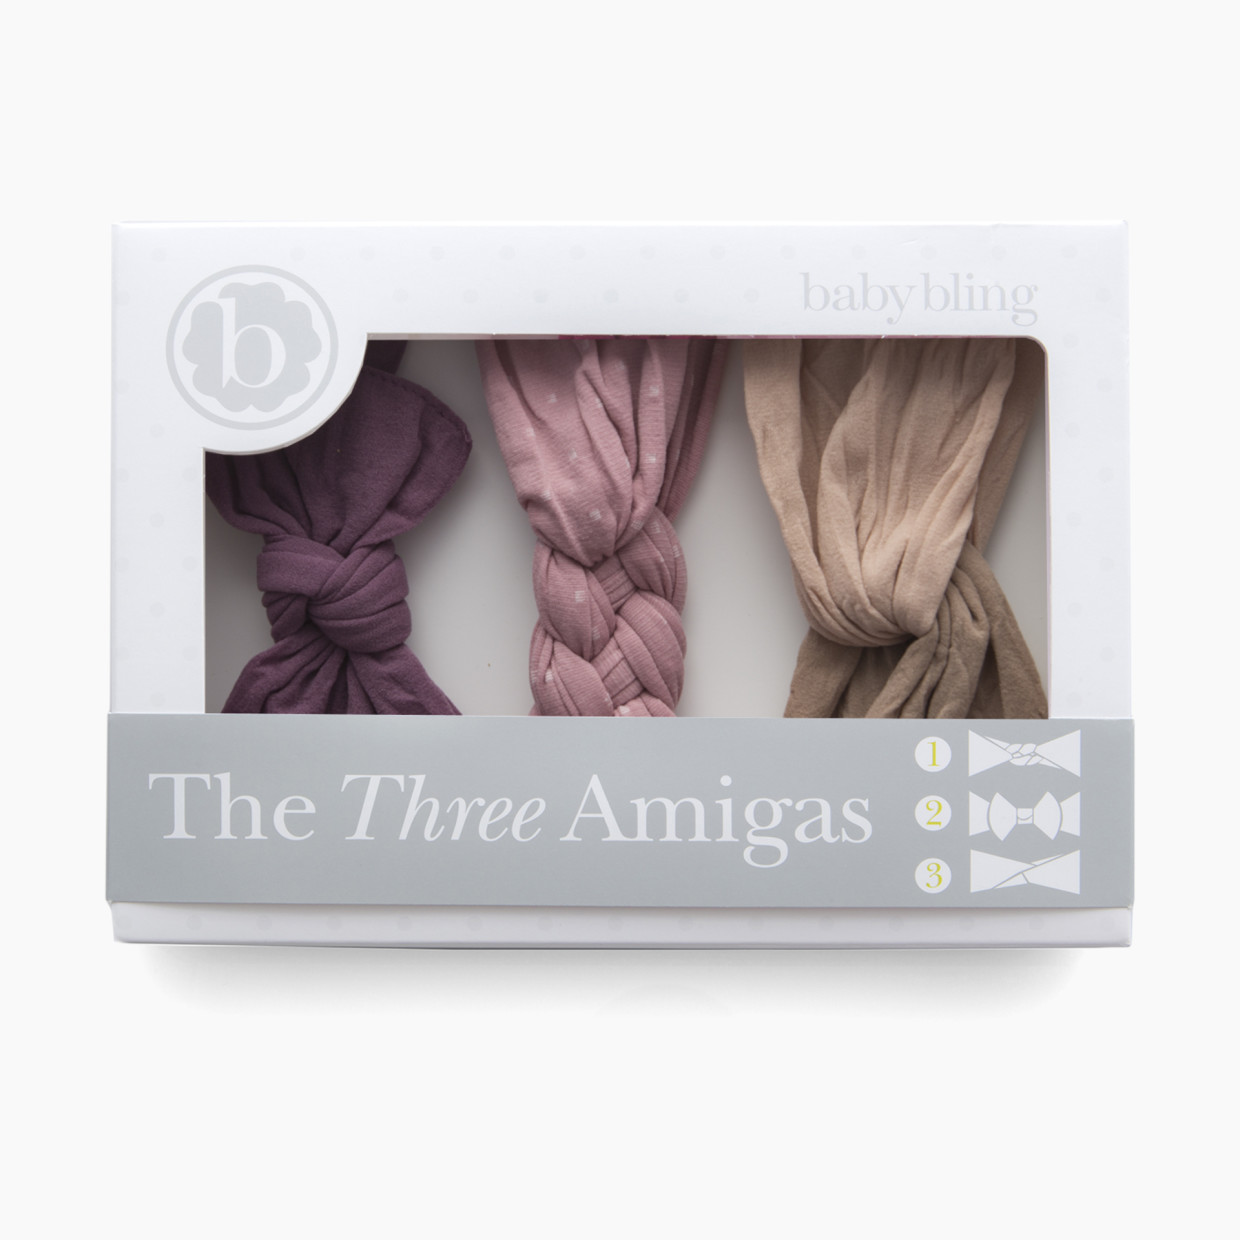 Baby Bling The Three Amigas Headband Bow Gift Set (3 Pack) - Mauve Dot/Lilac/Taupe.